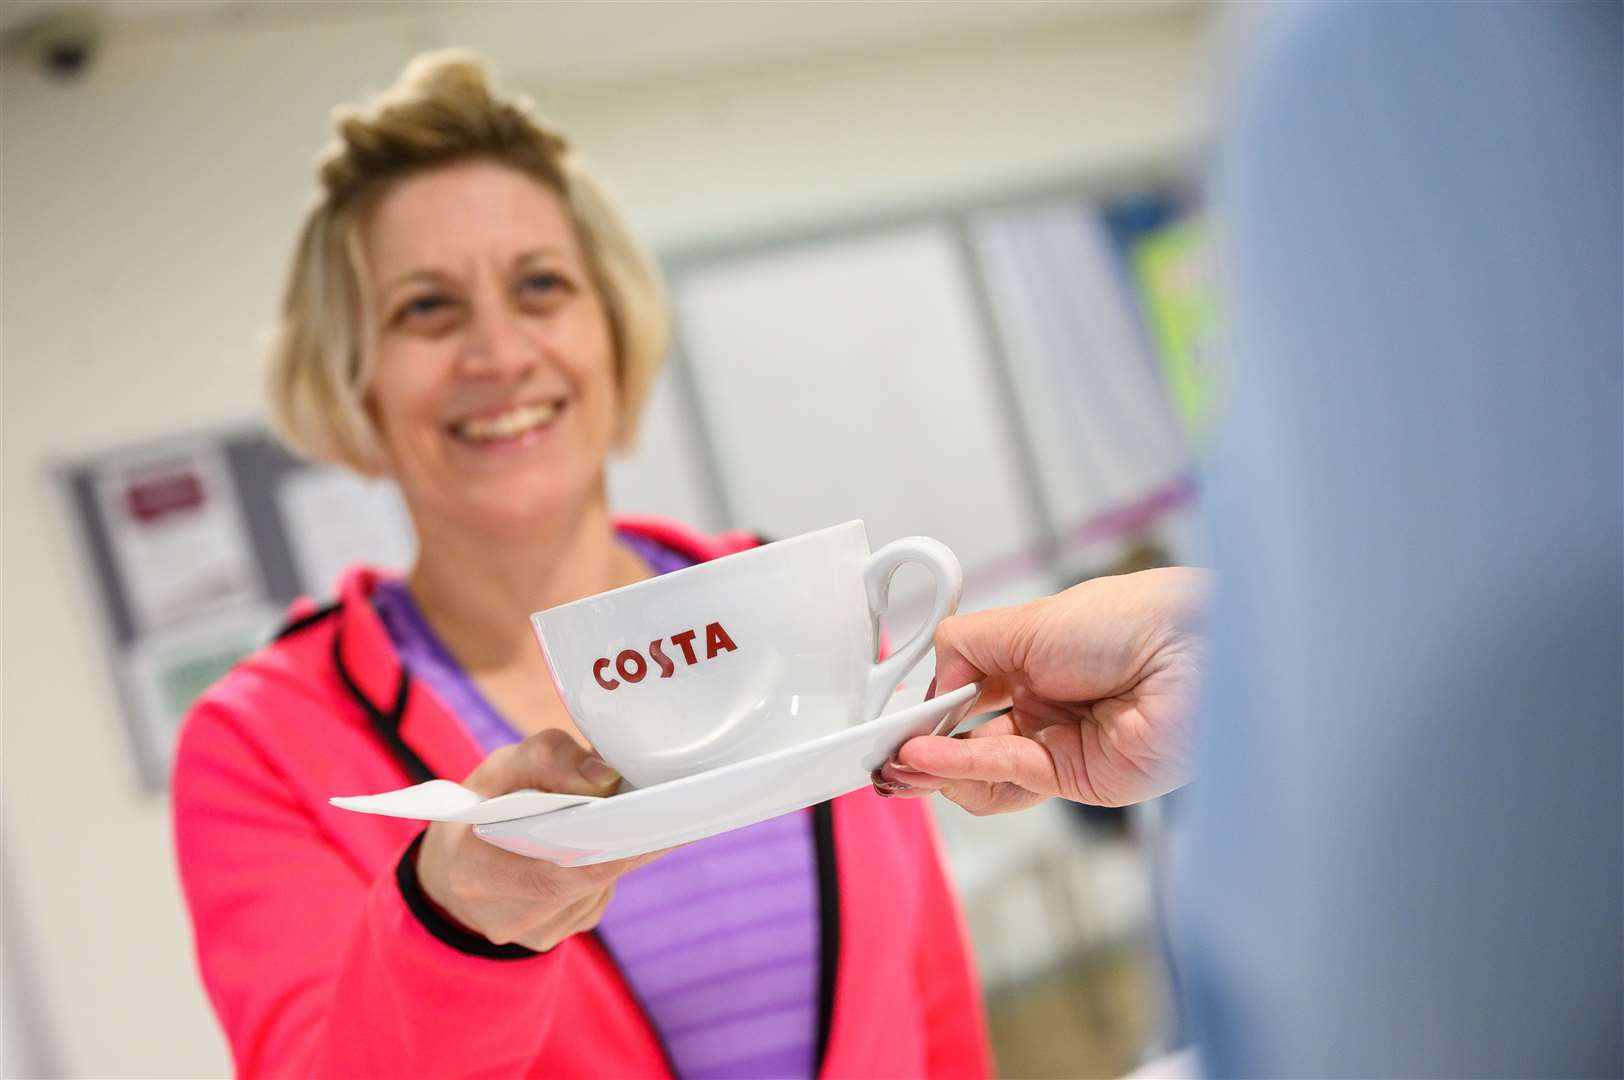 You will be able to get a Costa Coffee at the Stour Centre when it reopens